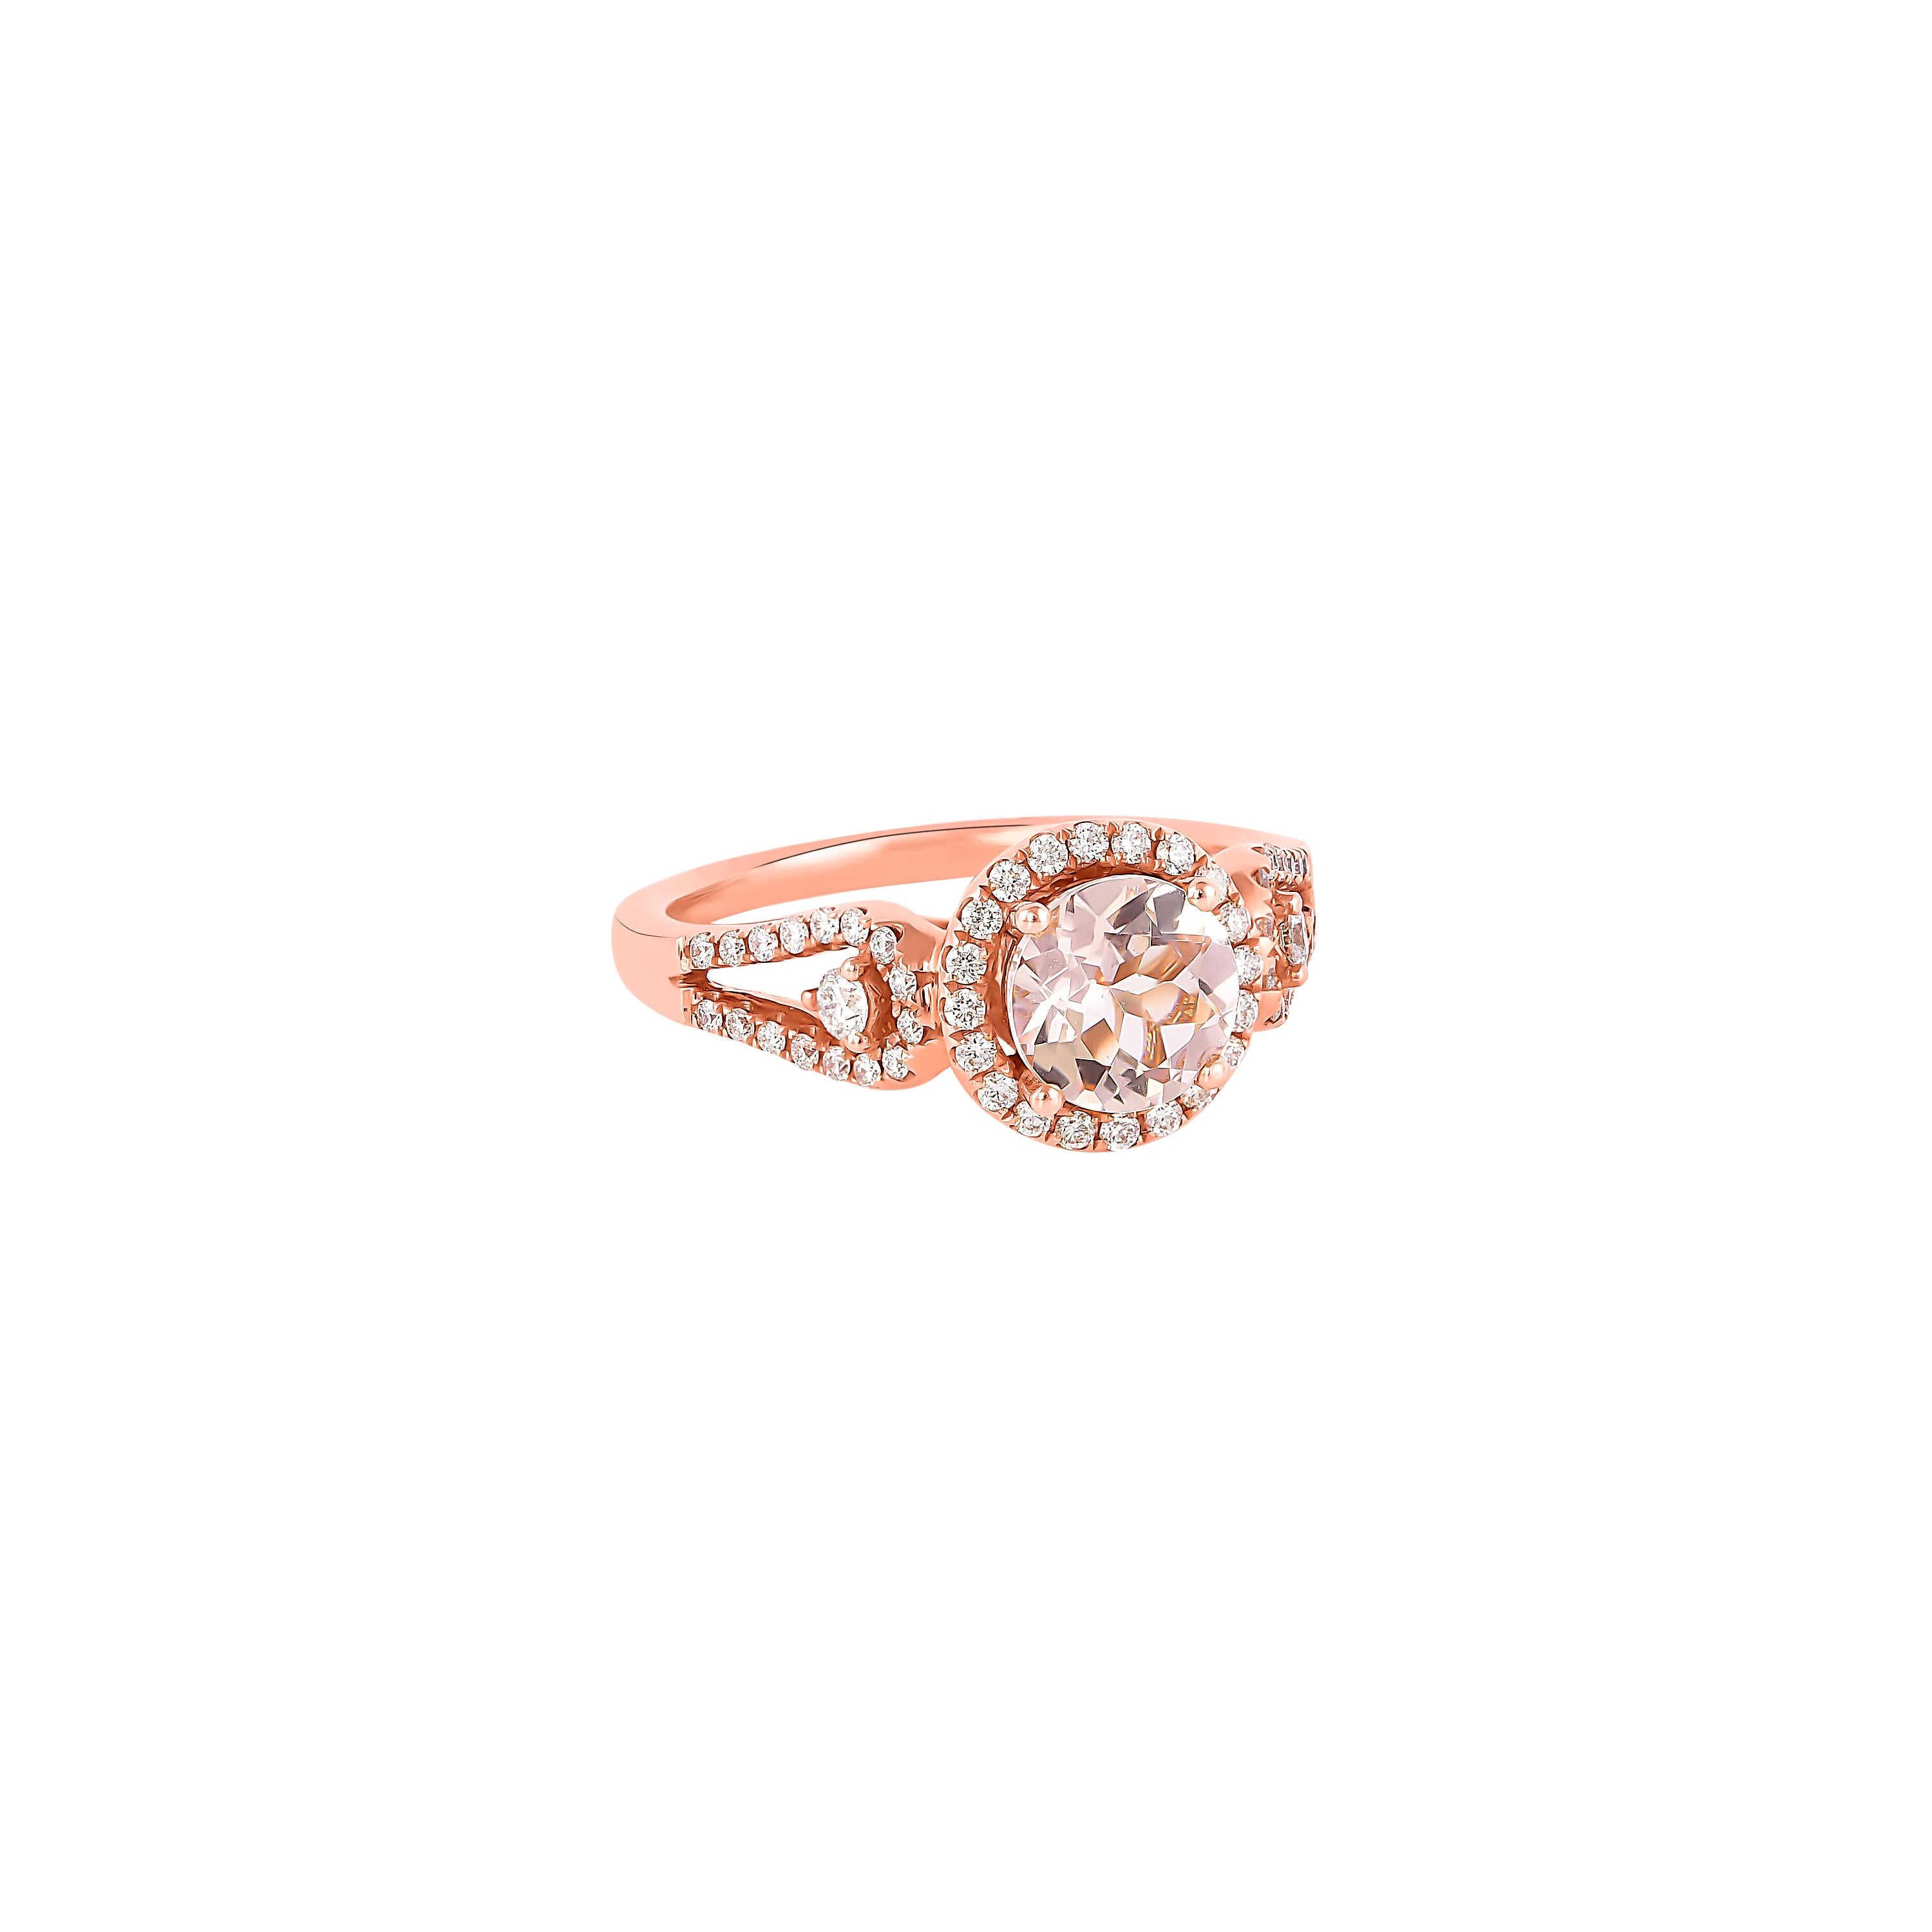 Contemporary 1.03 Carat Morganite and Diamond Ring in 18 Karat Rose Gold For Sale